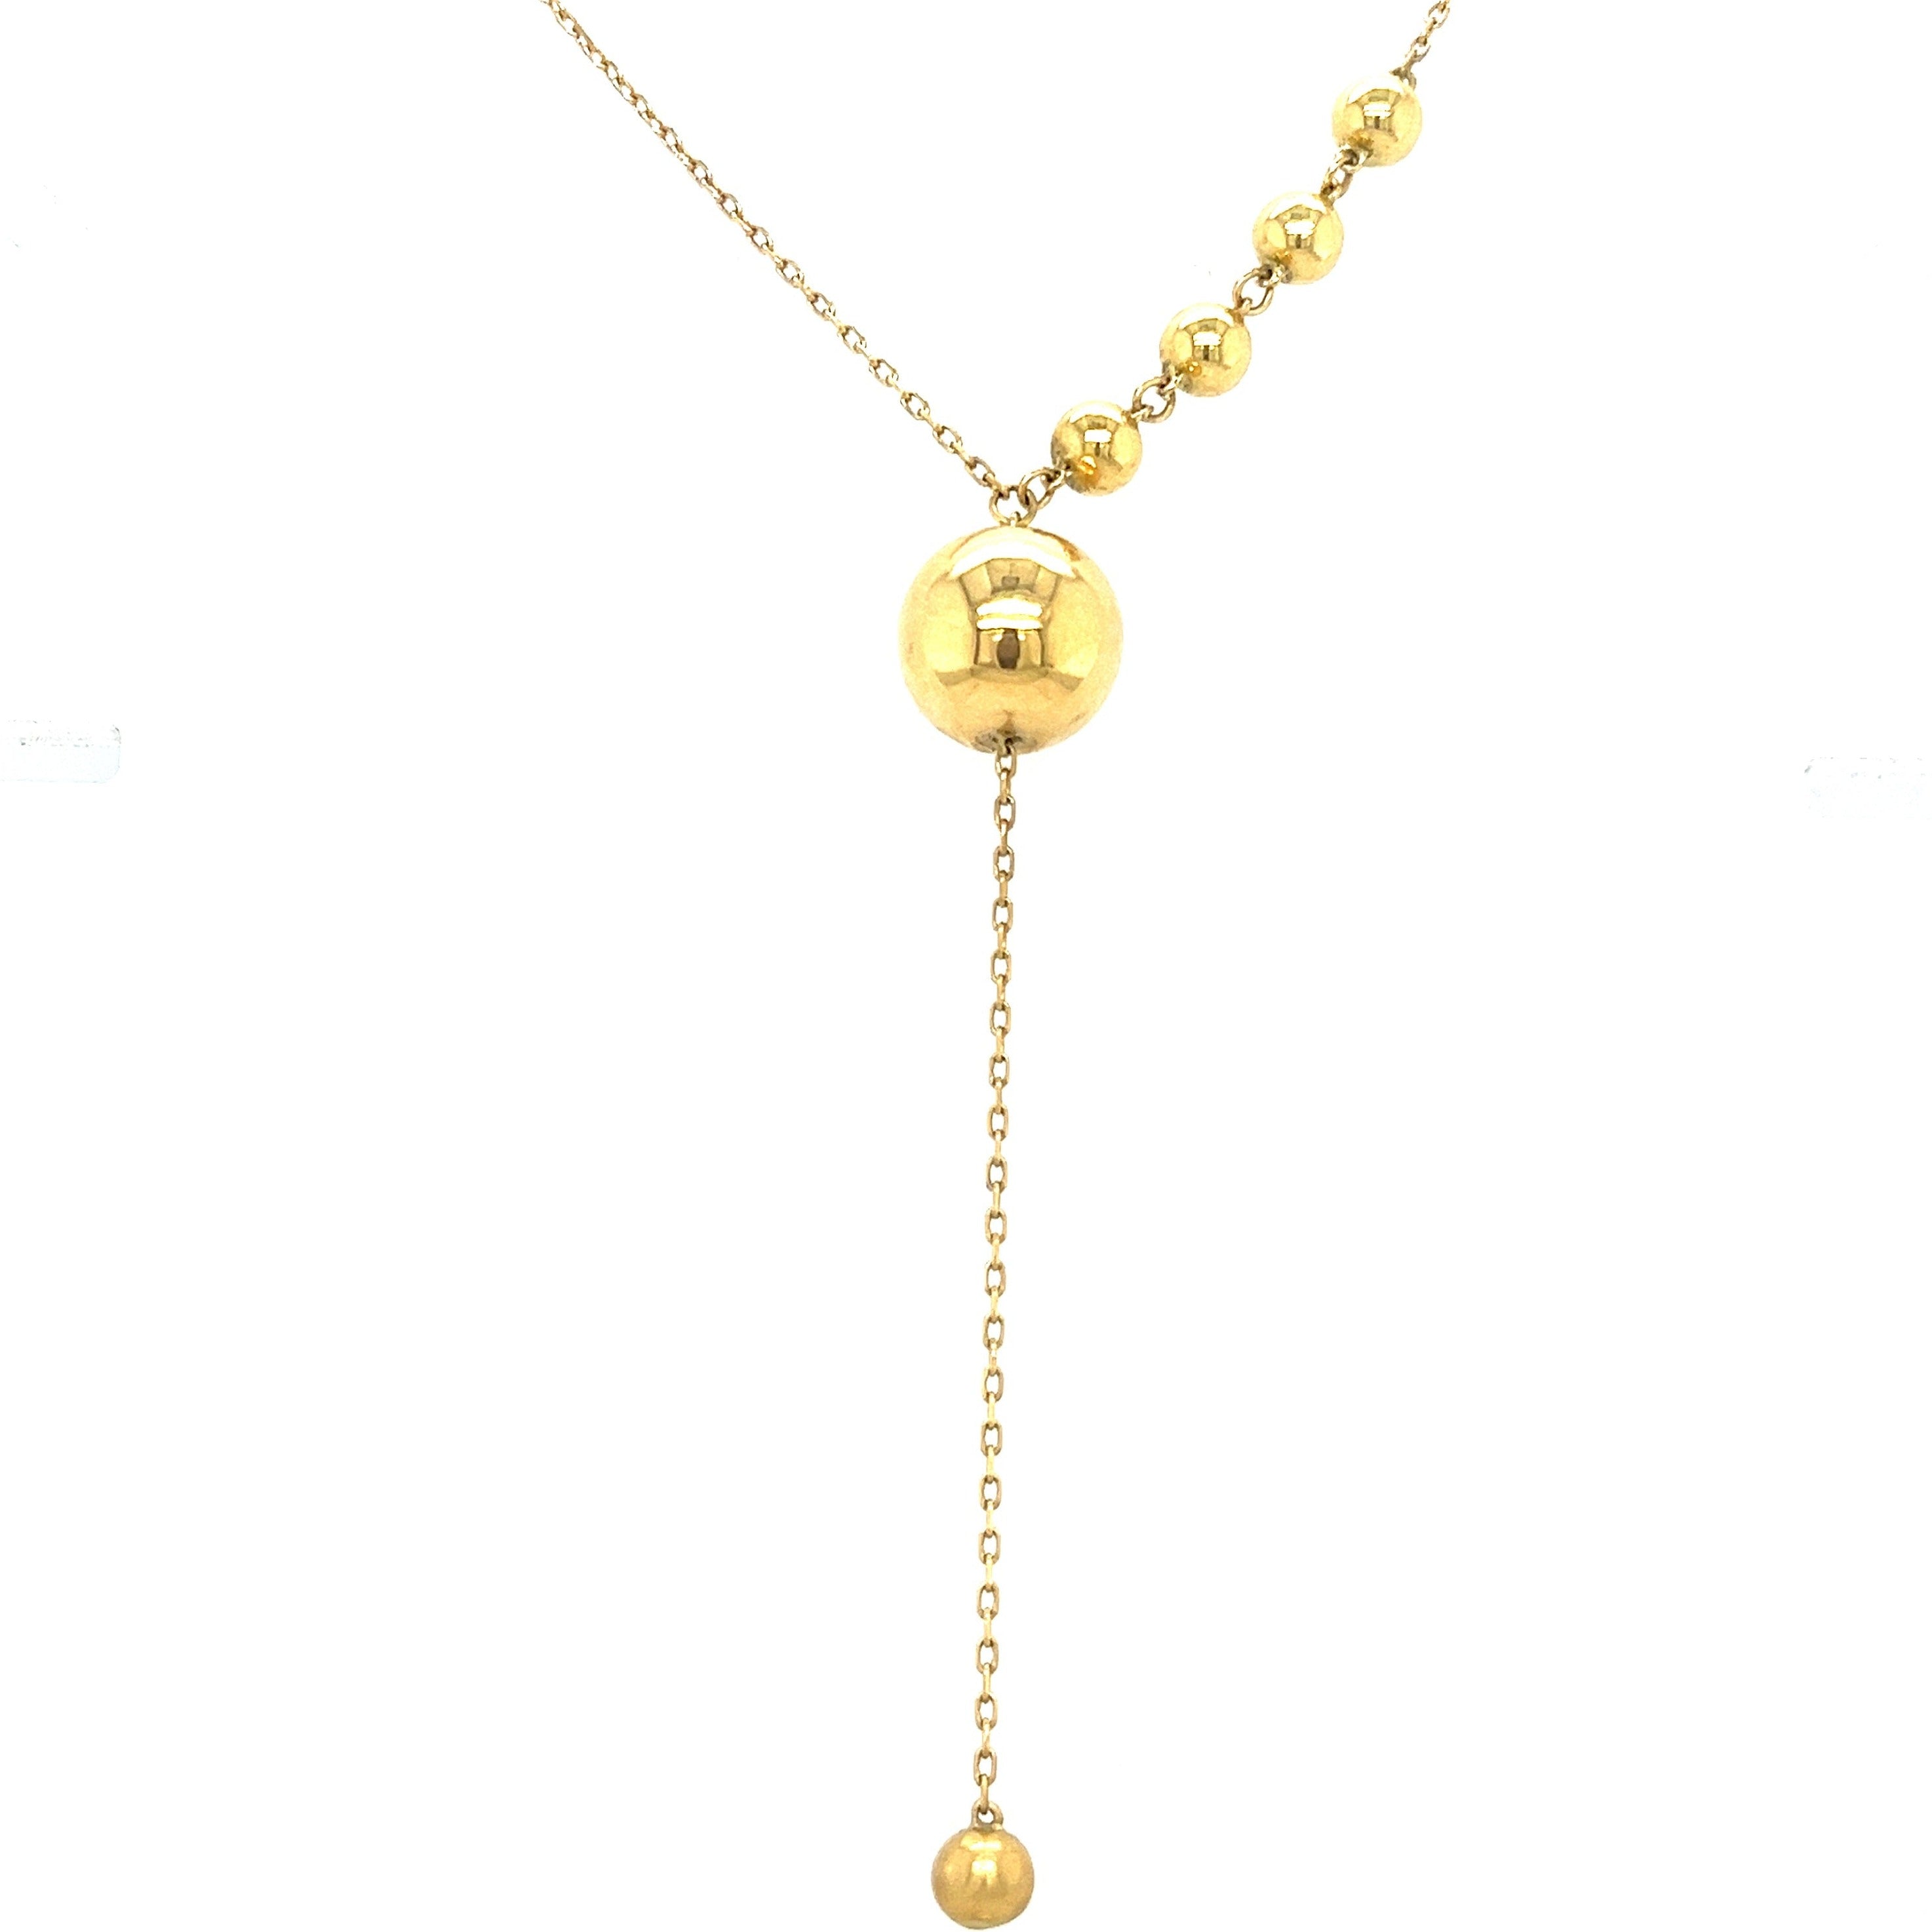 Unique Gold dangling ball Necklace - PBYT12NC/Y